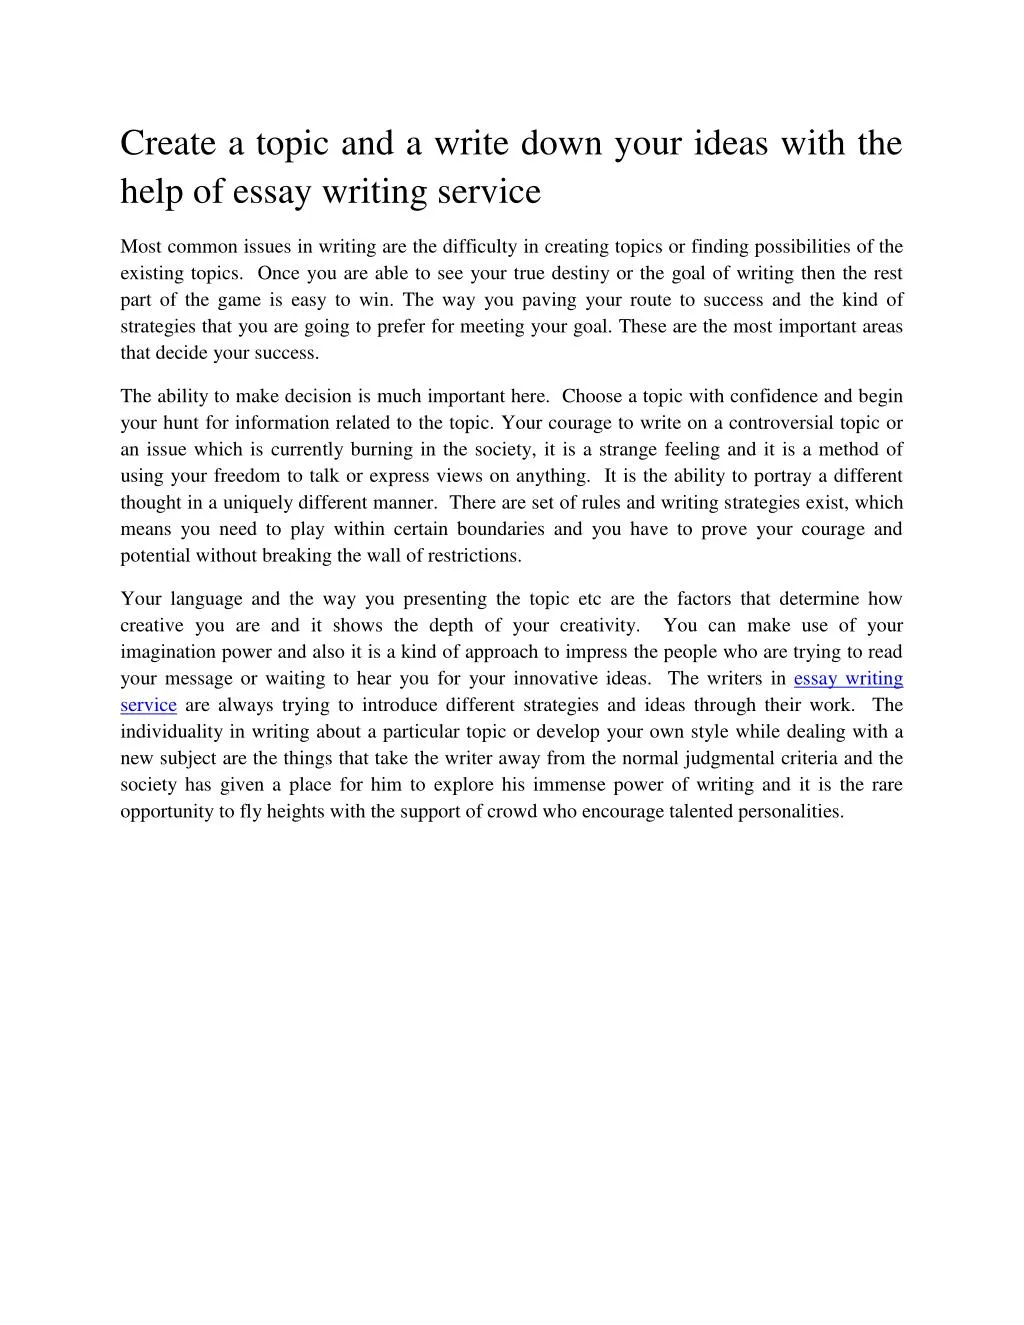 Essay about way to success